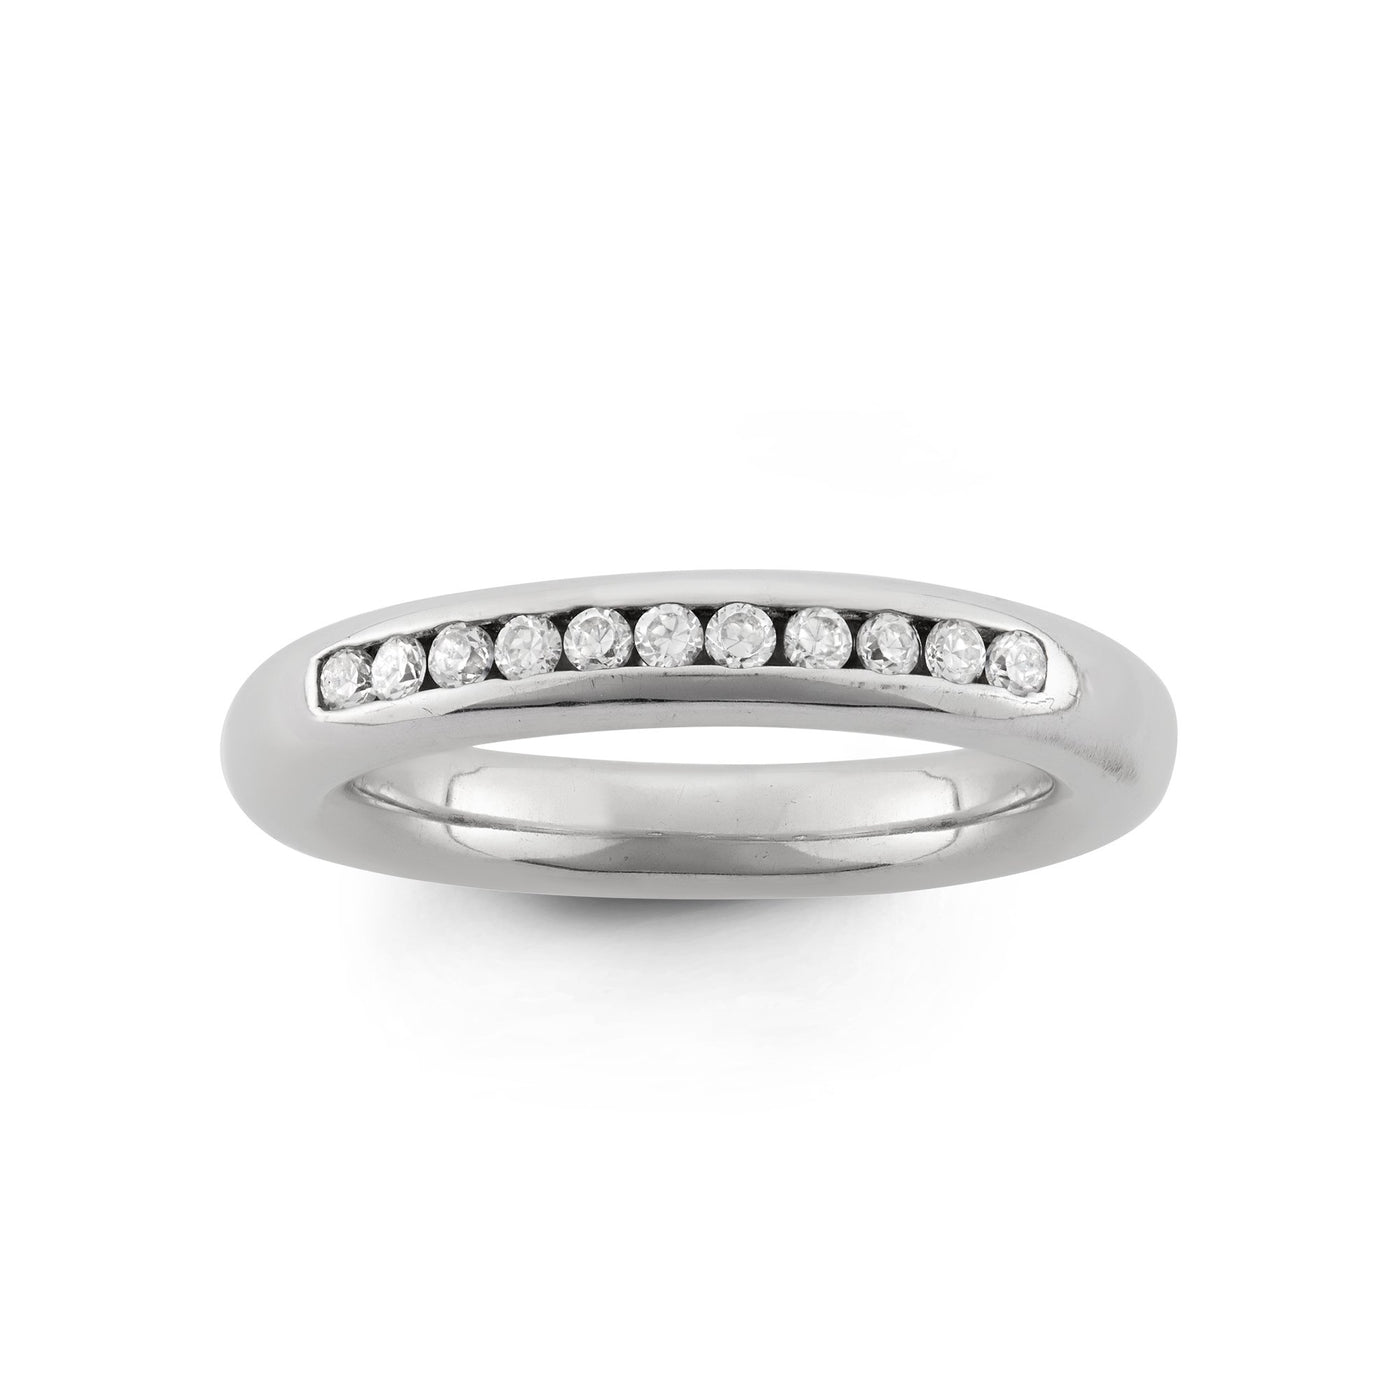 Sterling Silver Spinning Ring With Row Of White Set CZ